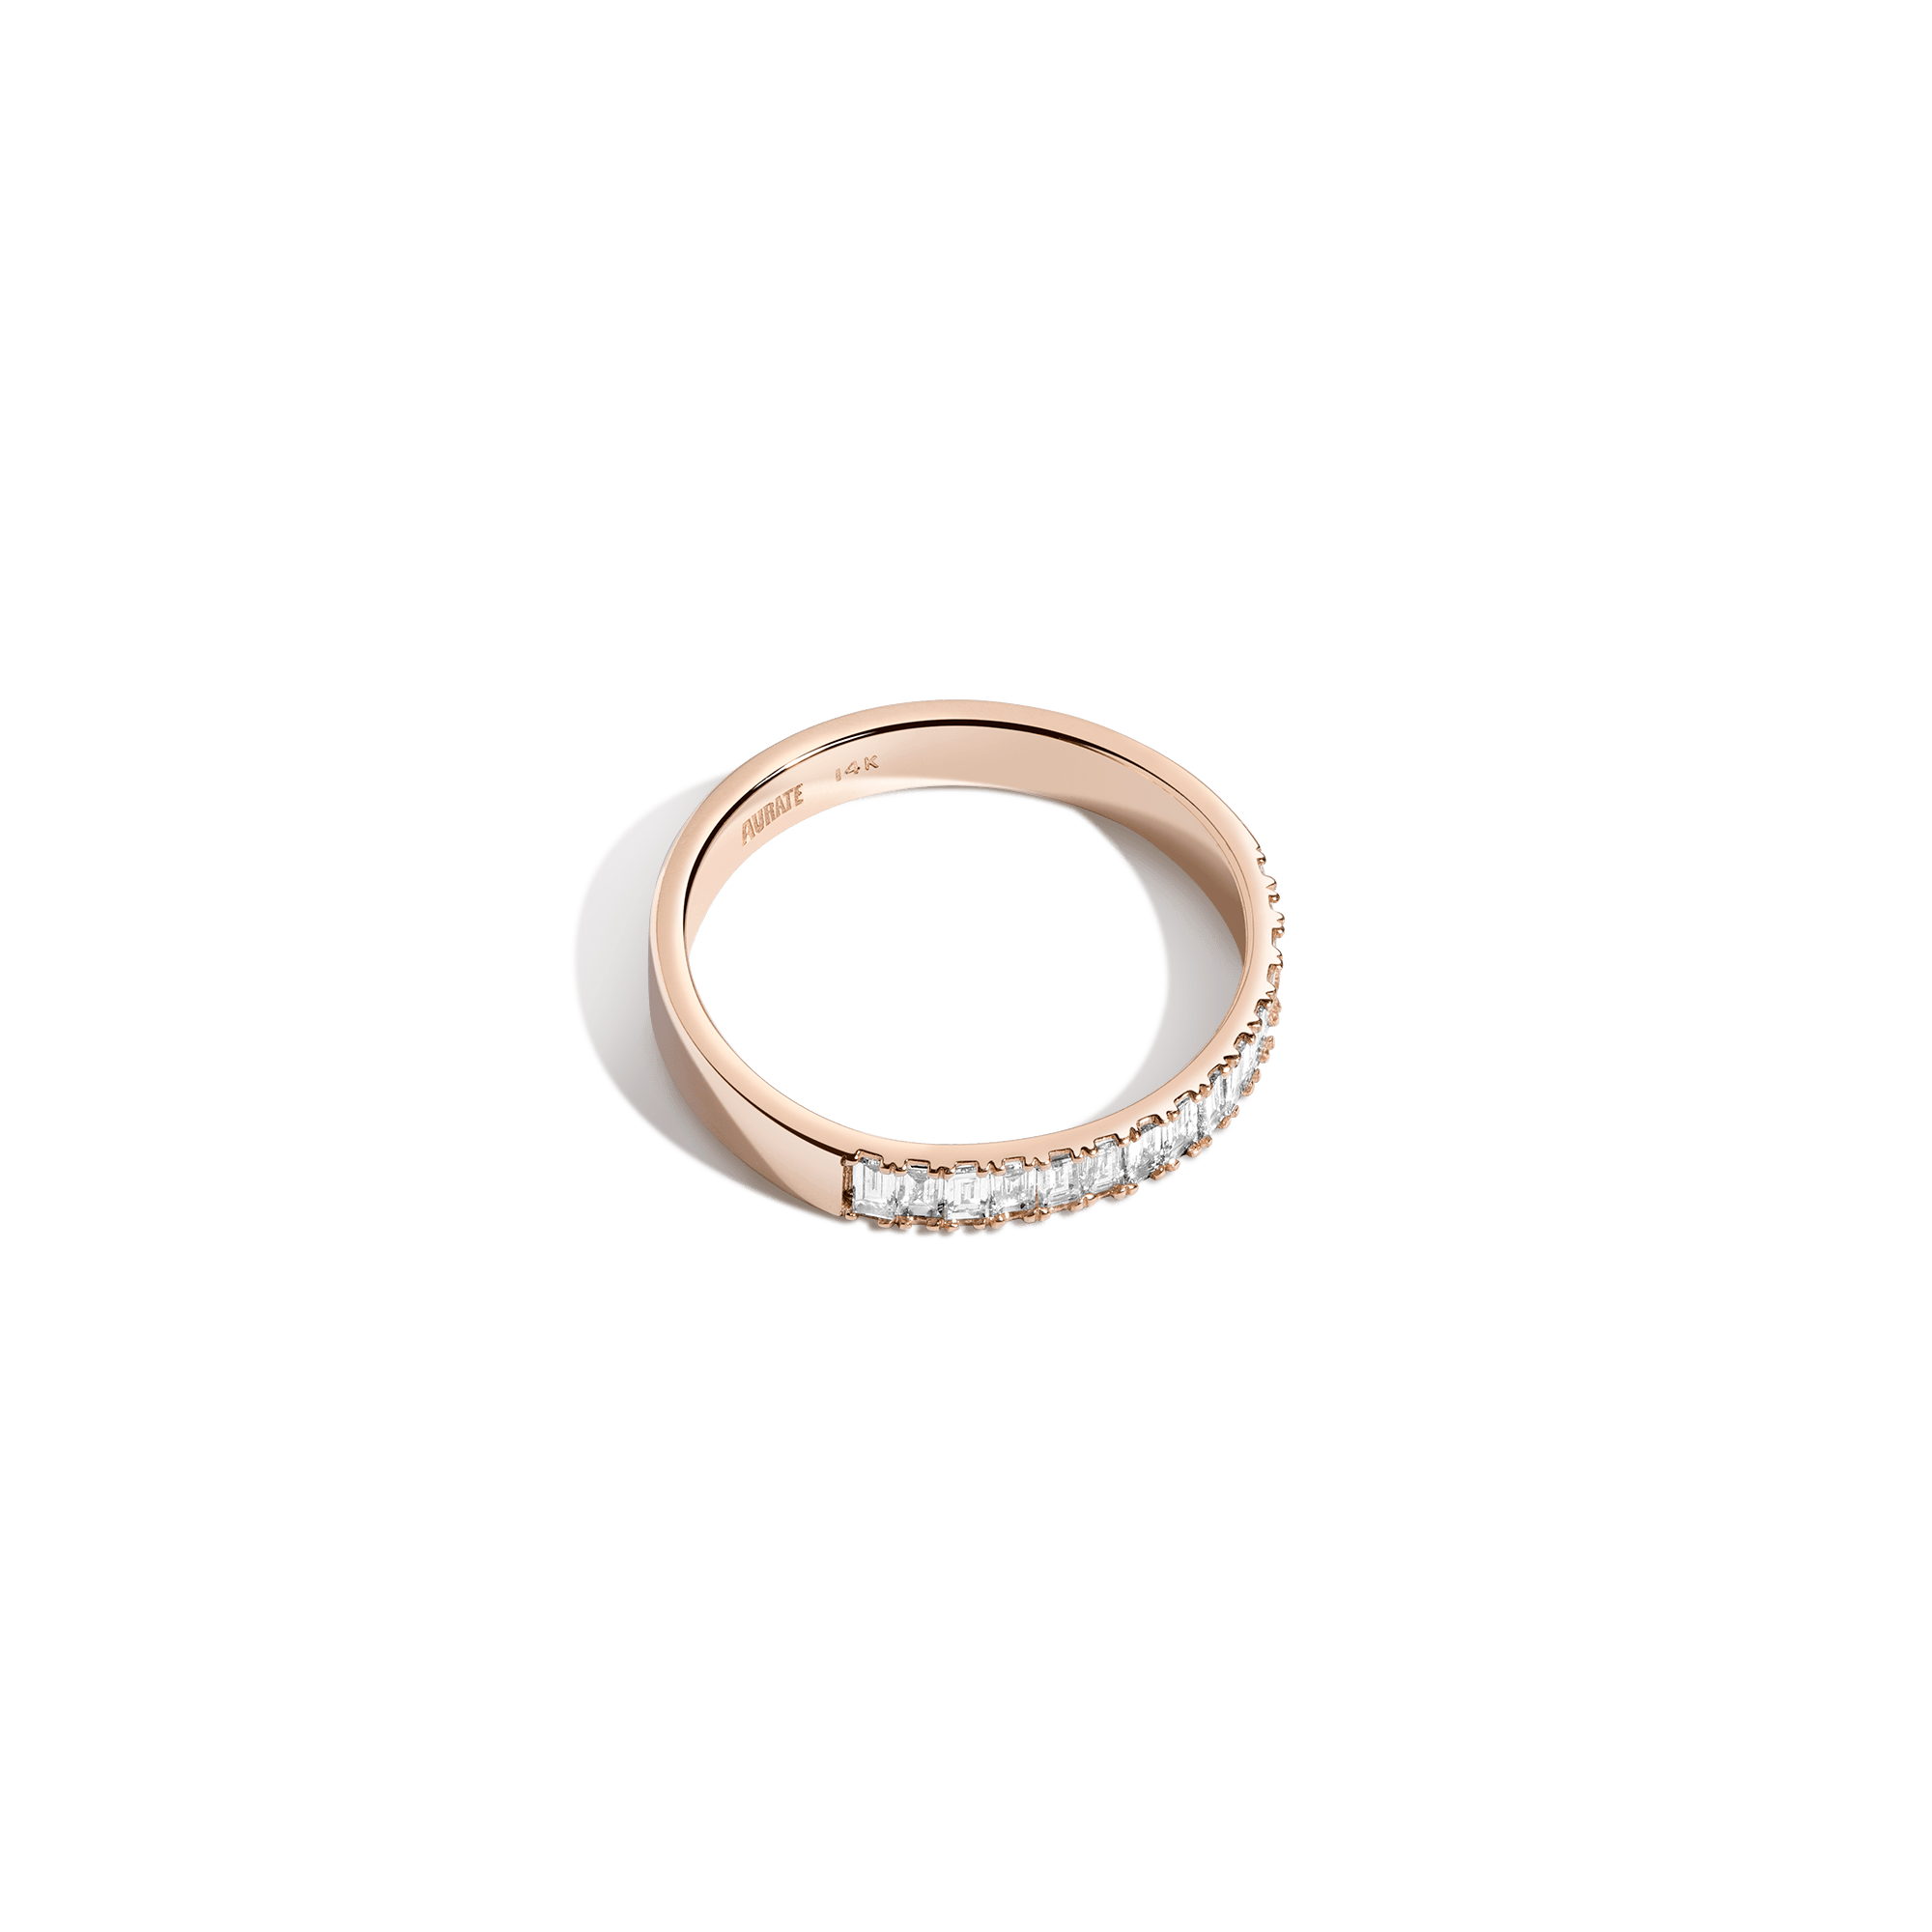 Bold Half Diamond Baguette Ring in Yellow, Rose or White Gold